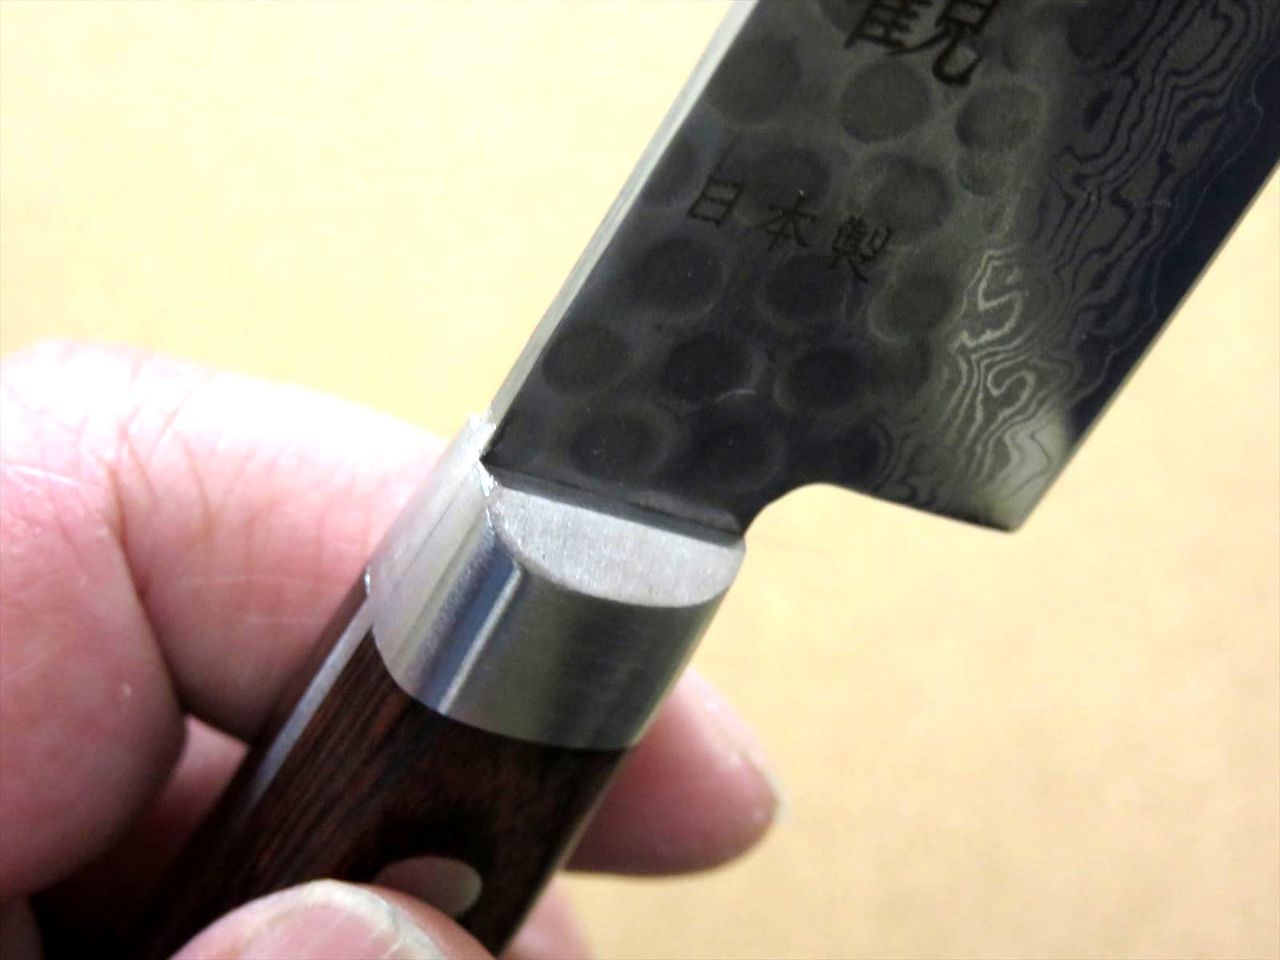 Japanese FUJIMI Kitchen Utility Knife 5.5" Hammer Forged VG-10 Damascus From JAPAN